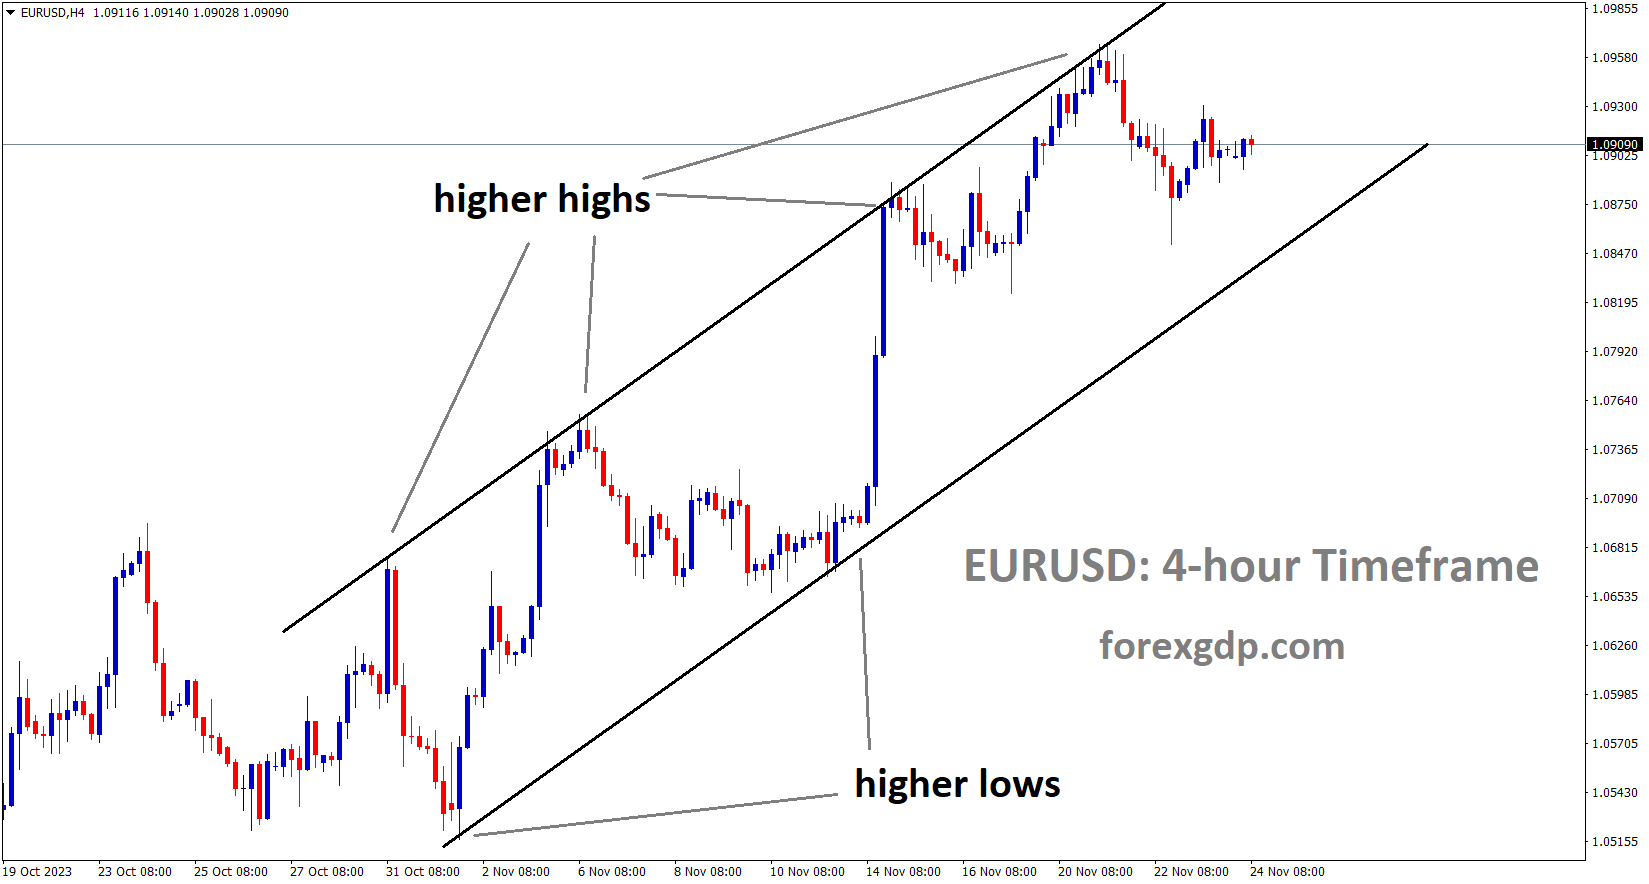 EURUSD is moving in an Ascending channel and the market has fallen from the higher high area of the channel